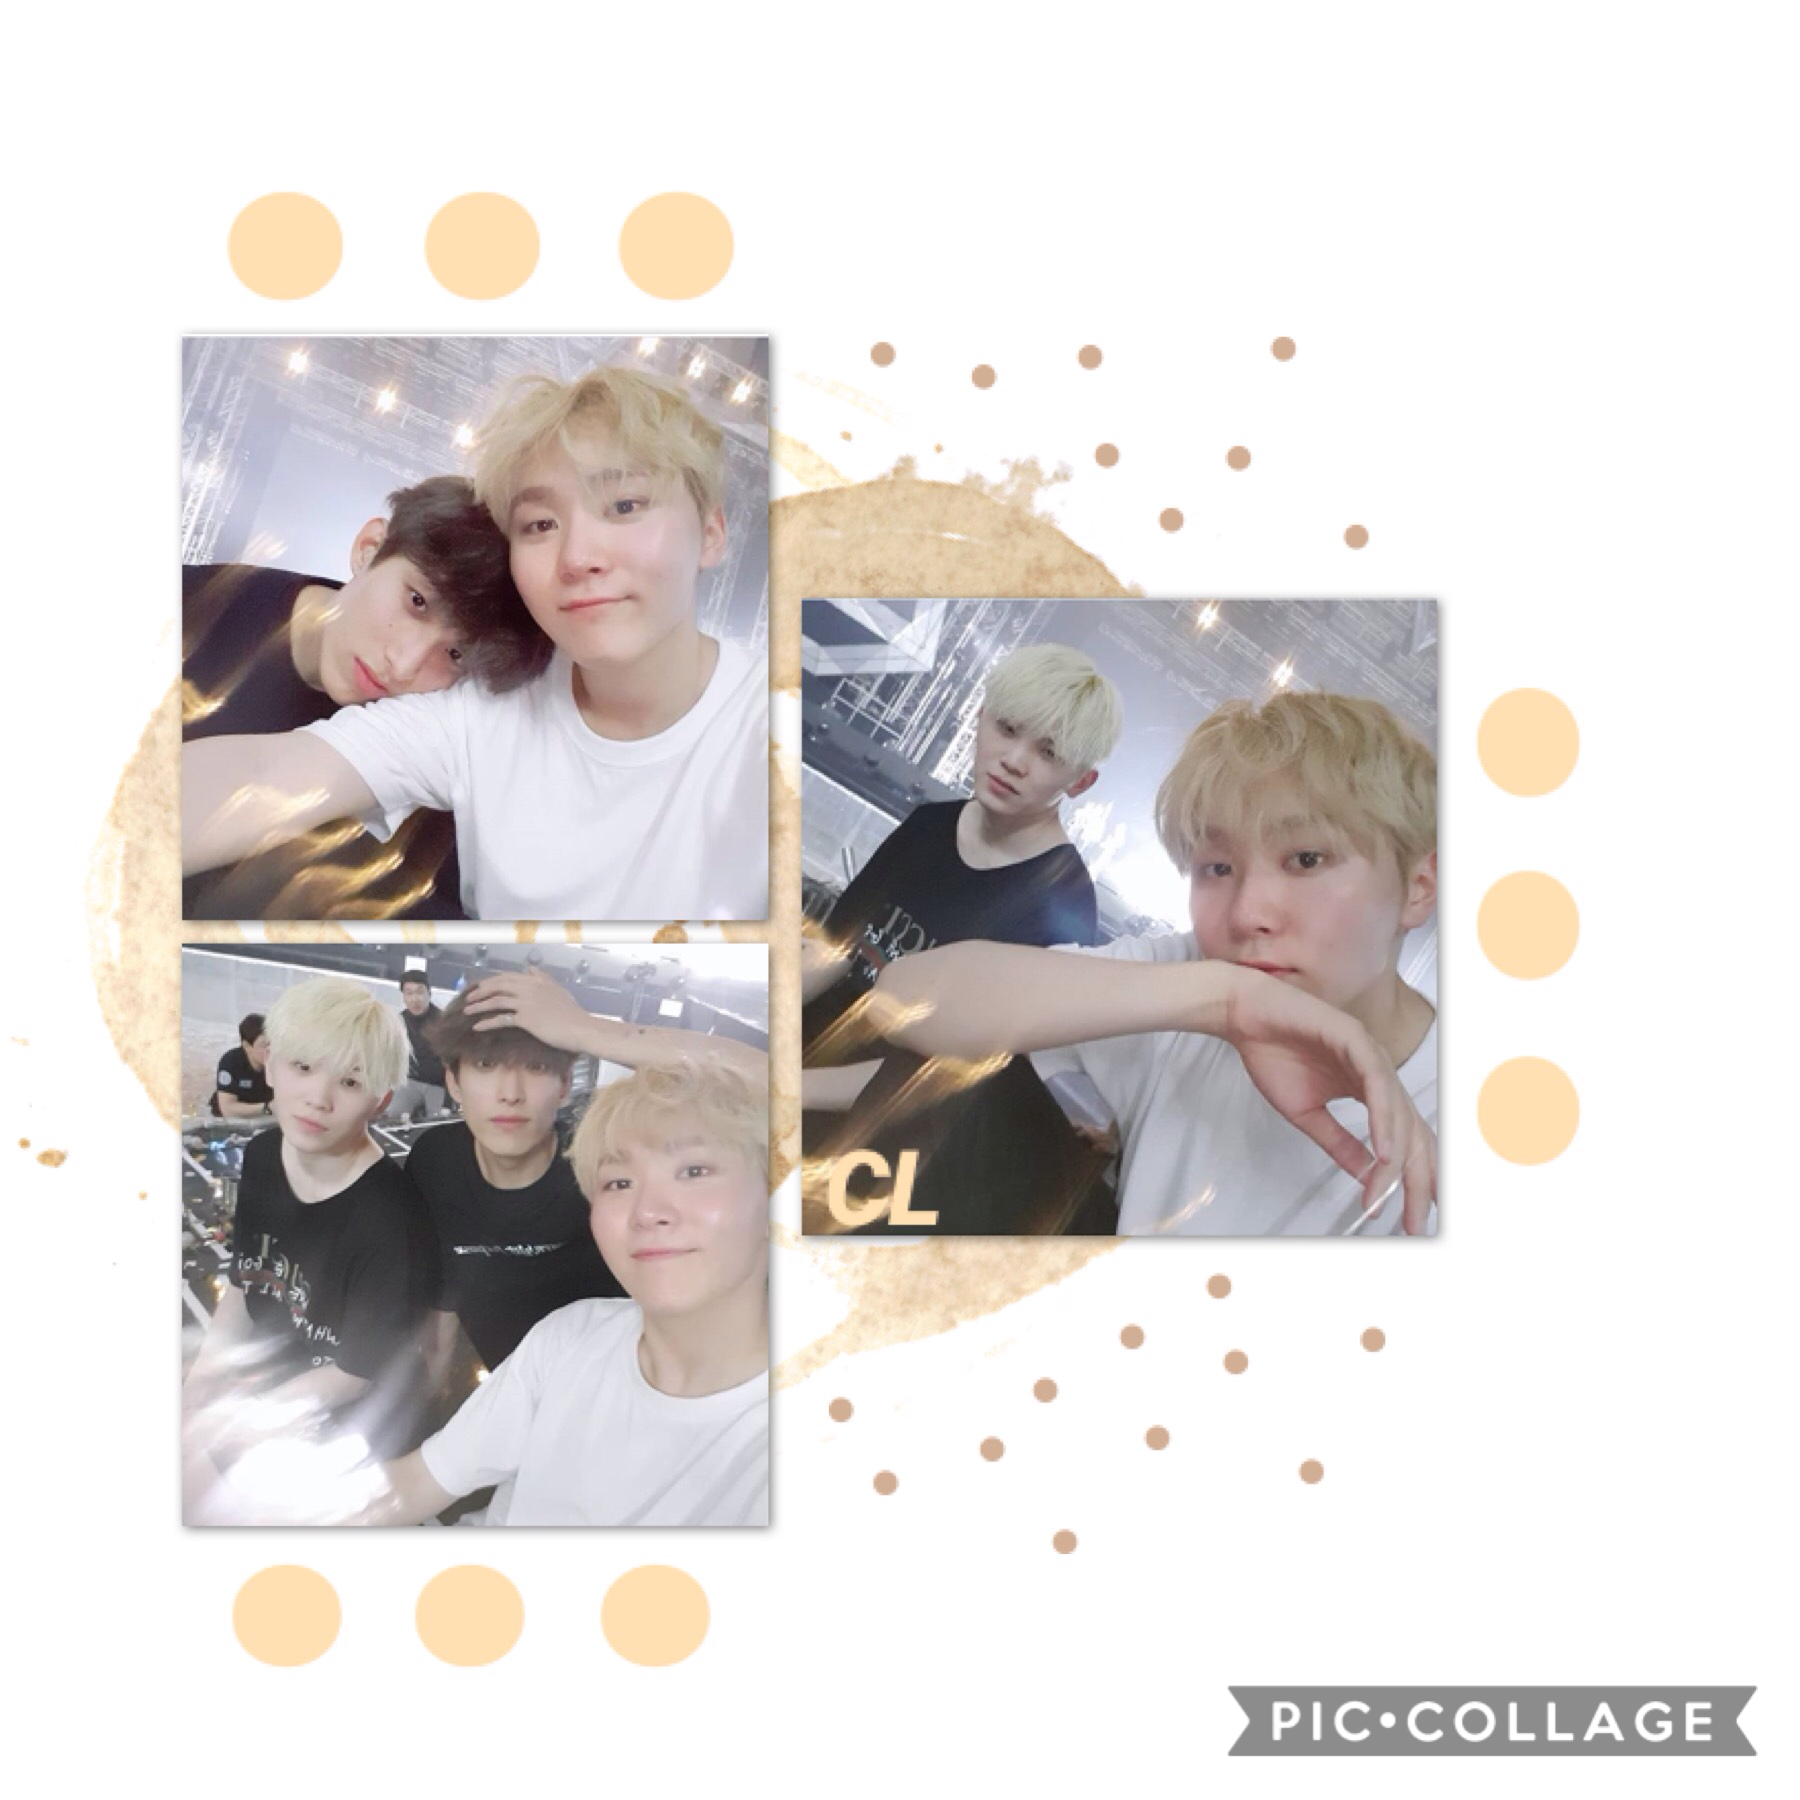 click🐿
[seungkwan+woozi+dk]
🐿🐿🐿
another edit
wow
be proud of me😂